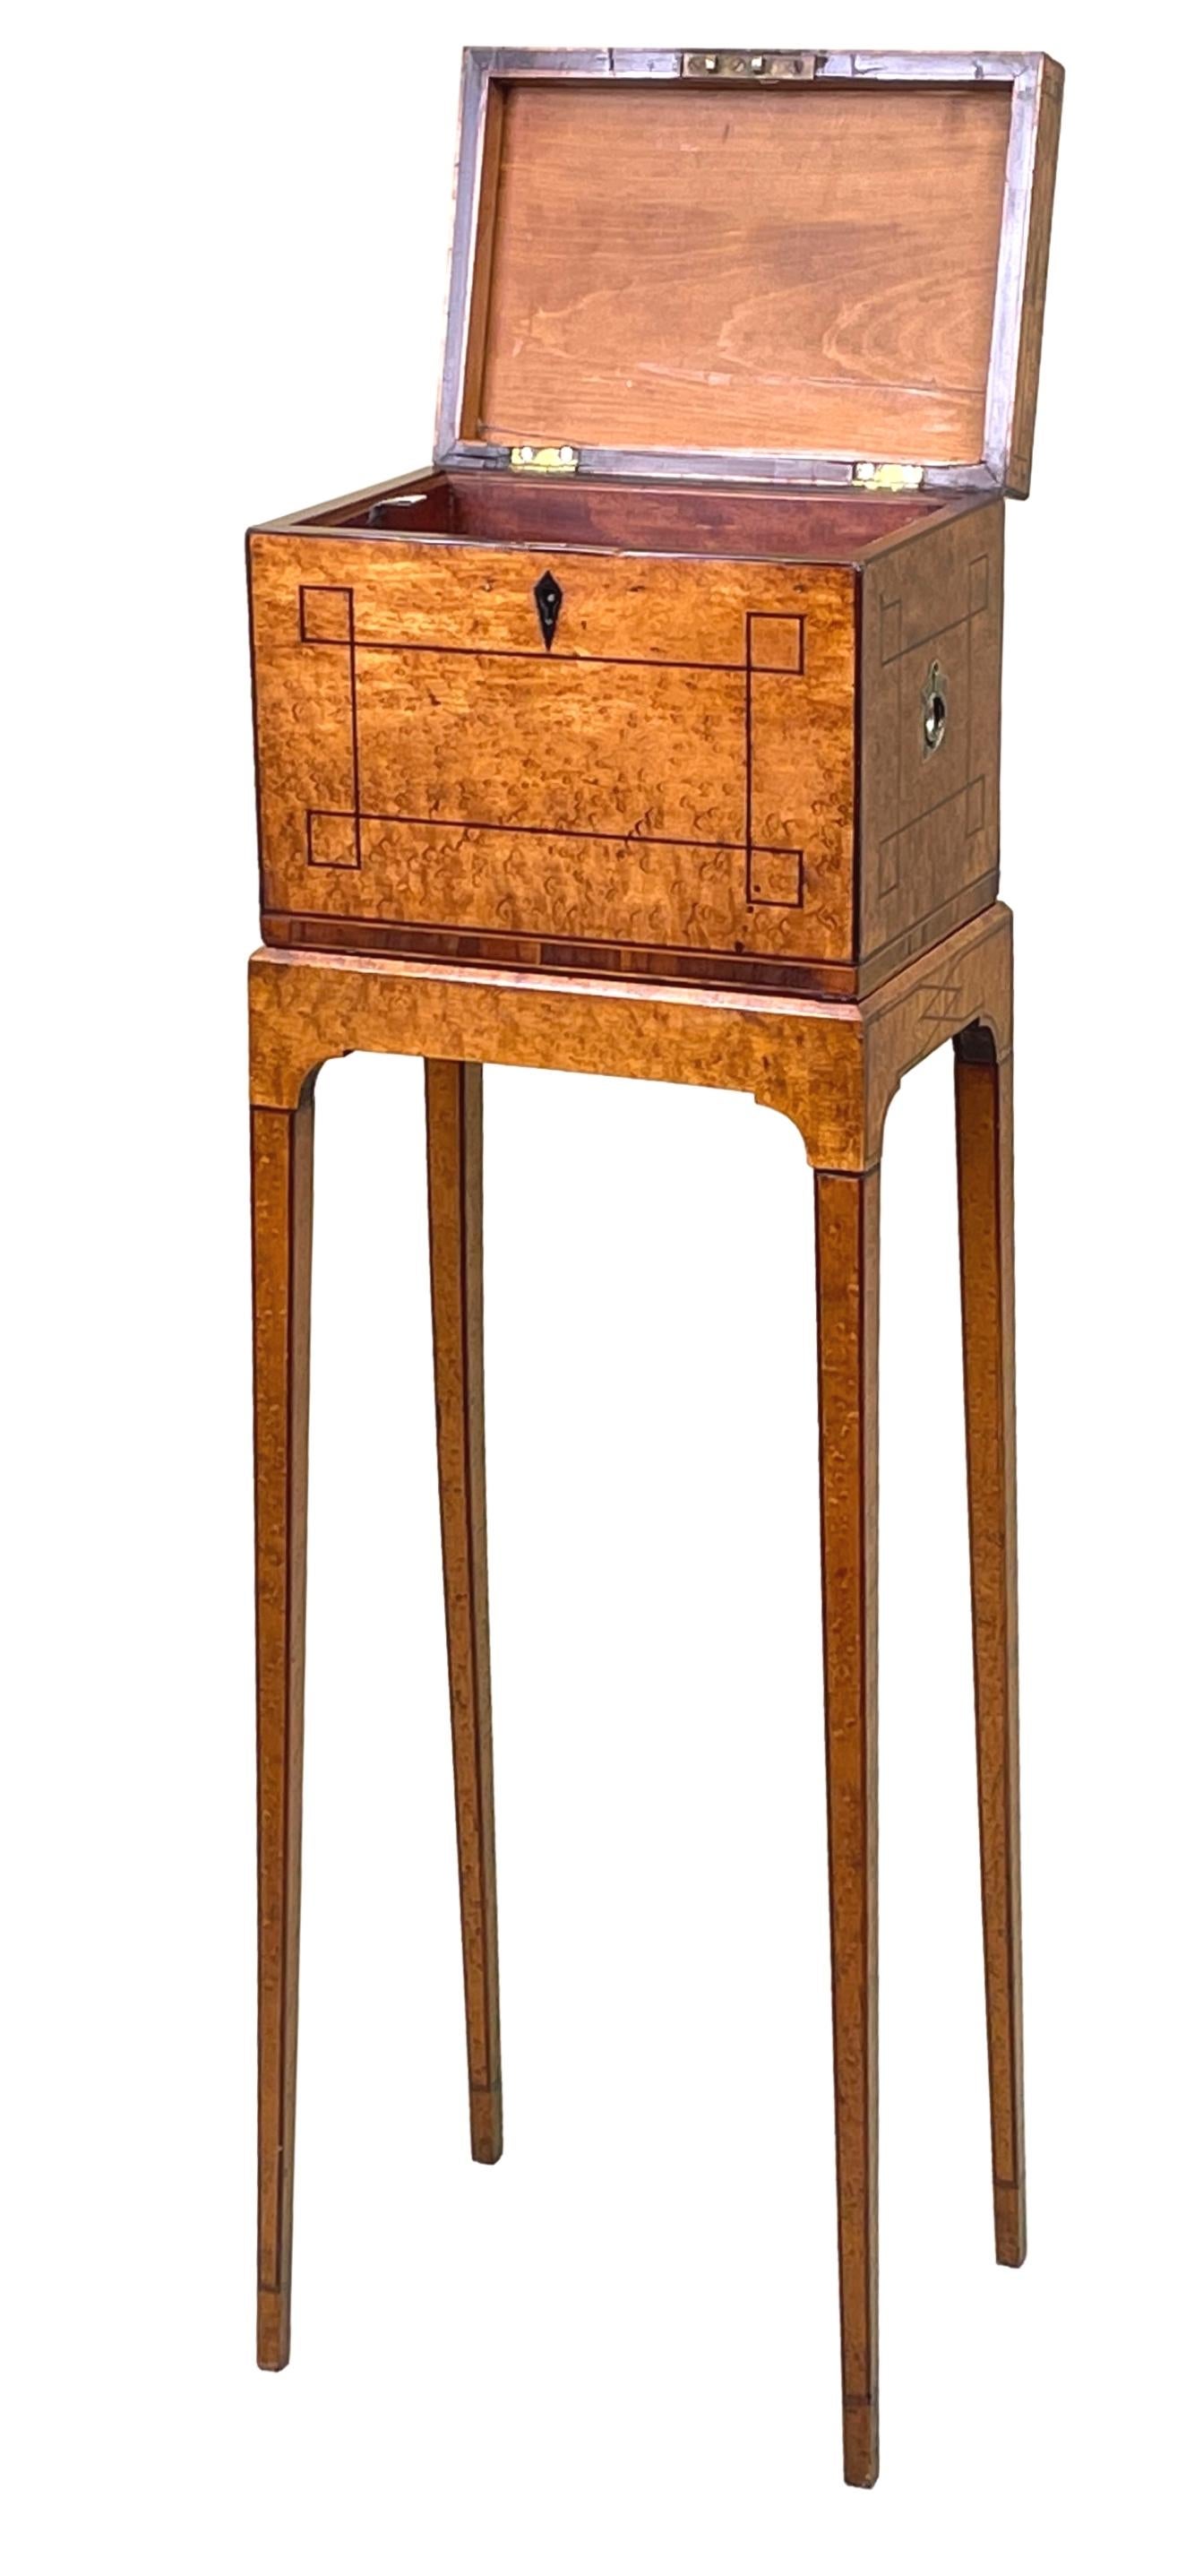 A fine early 19th century Georgian early Regency Period birdseye maple veneered jewellery, or sewing, box having hinged lid enclosing three removable mahogany lined trays with original flush fitted brass handle to each side, housed on original stand